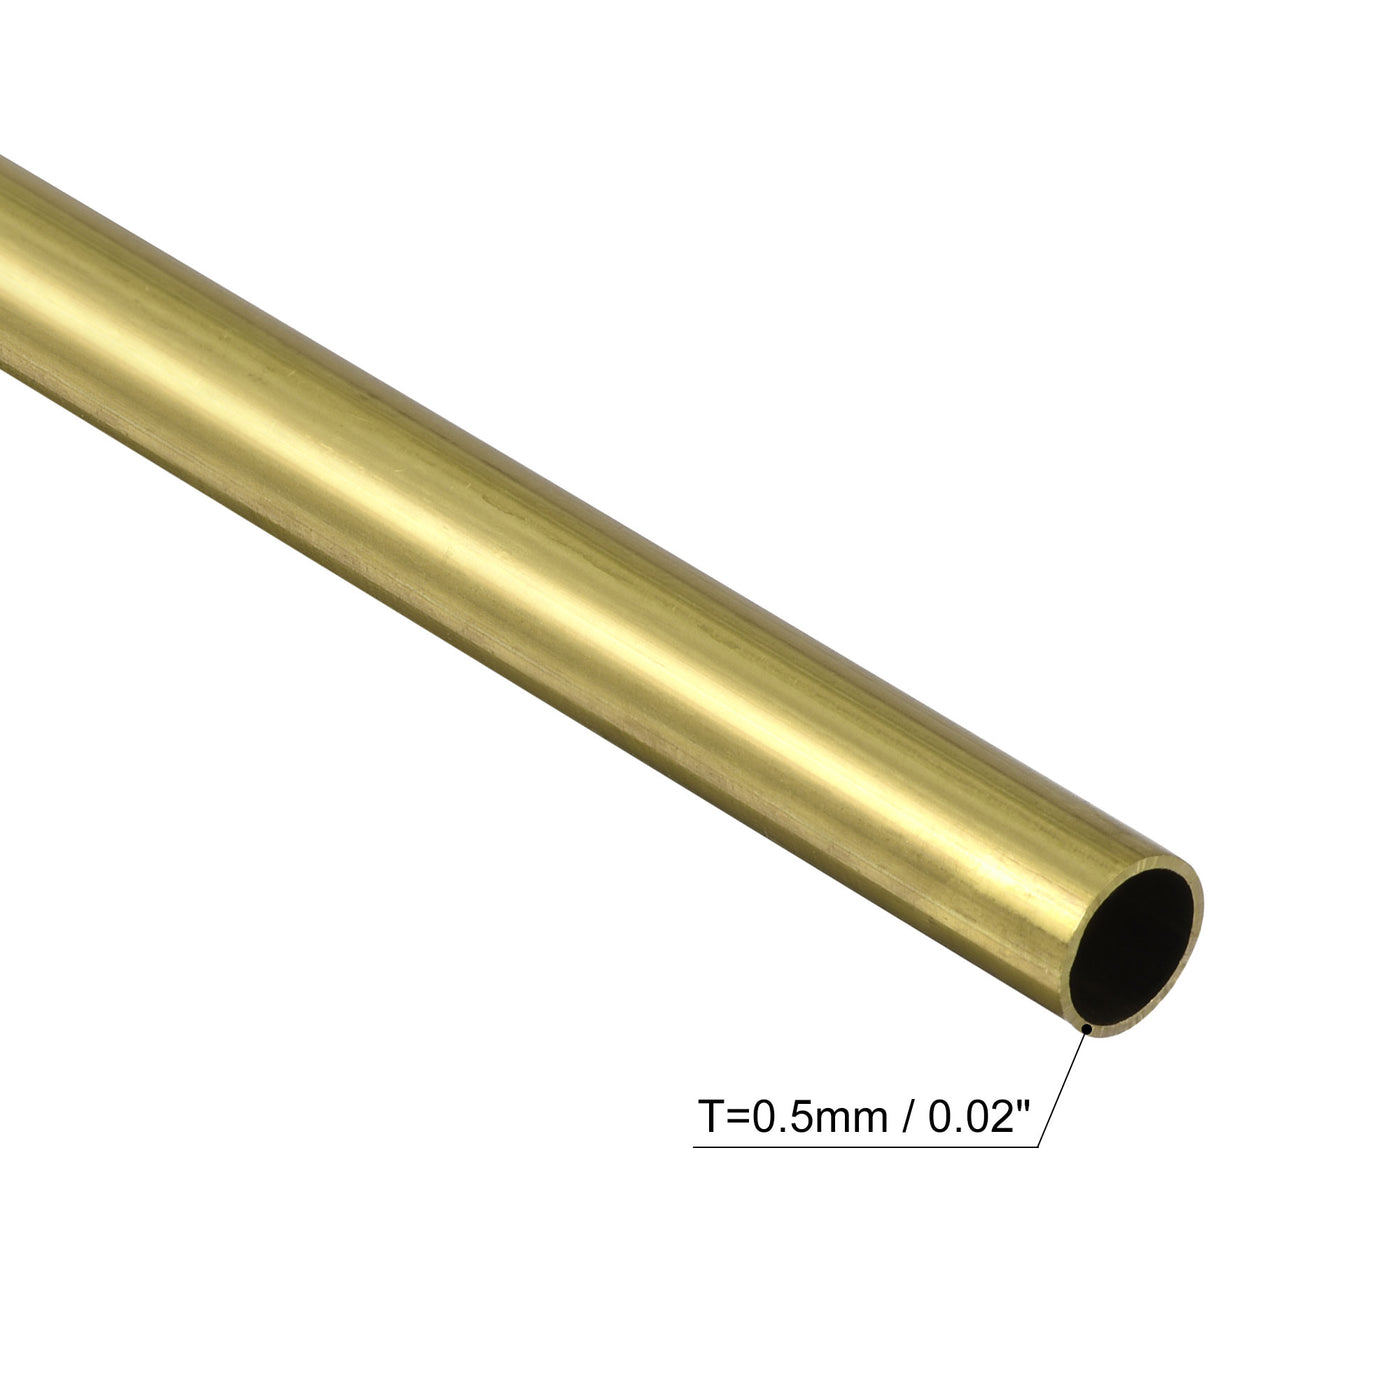 uxcell Uxcell 7mm x 0.5mm x 400mm Seamless Straight Brass Tube for Industry DIY Projects